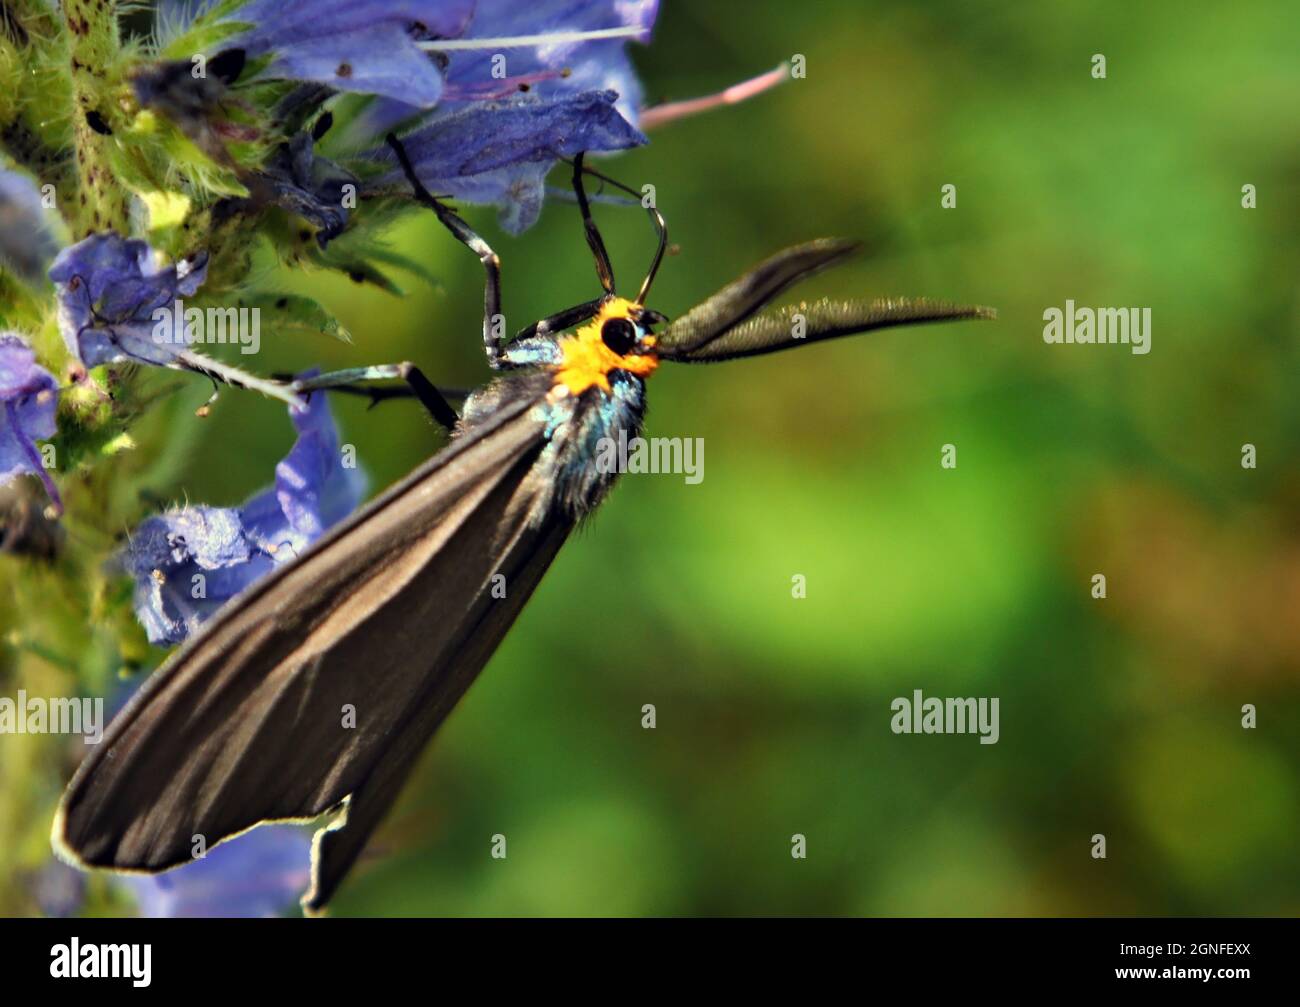 Close-up of a virgina ctenucha tiger moth collecting nectar from the purple flowers on a viper's bugloss plant growing in a meadow. Stock Photo